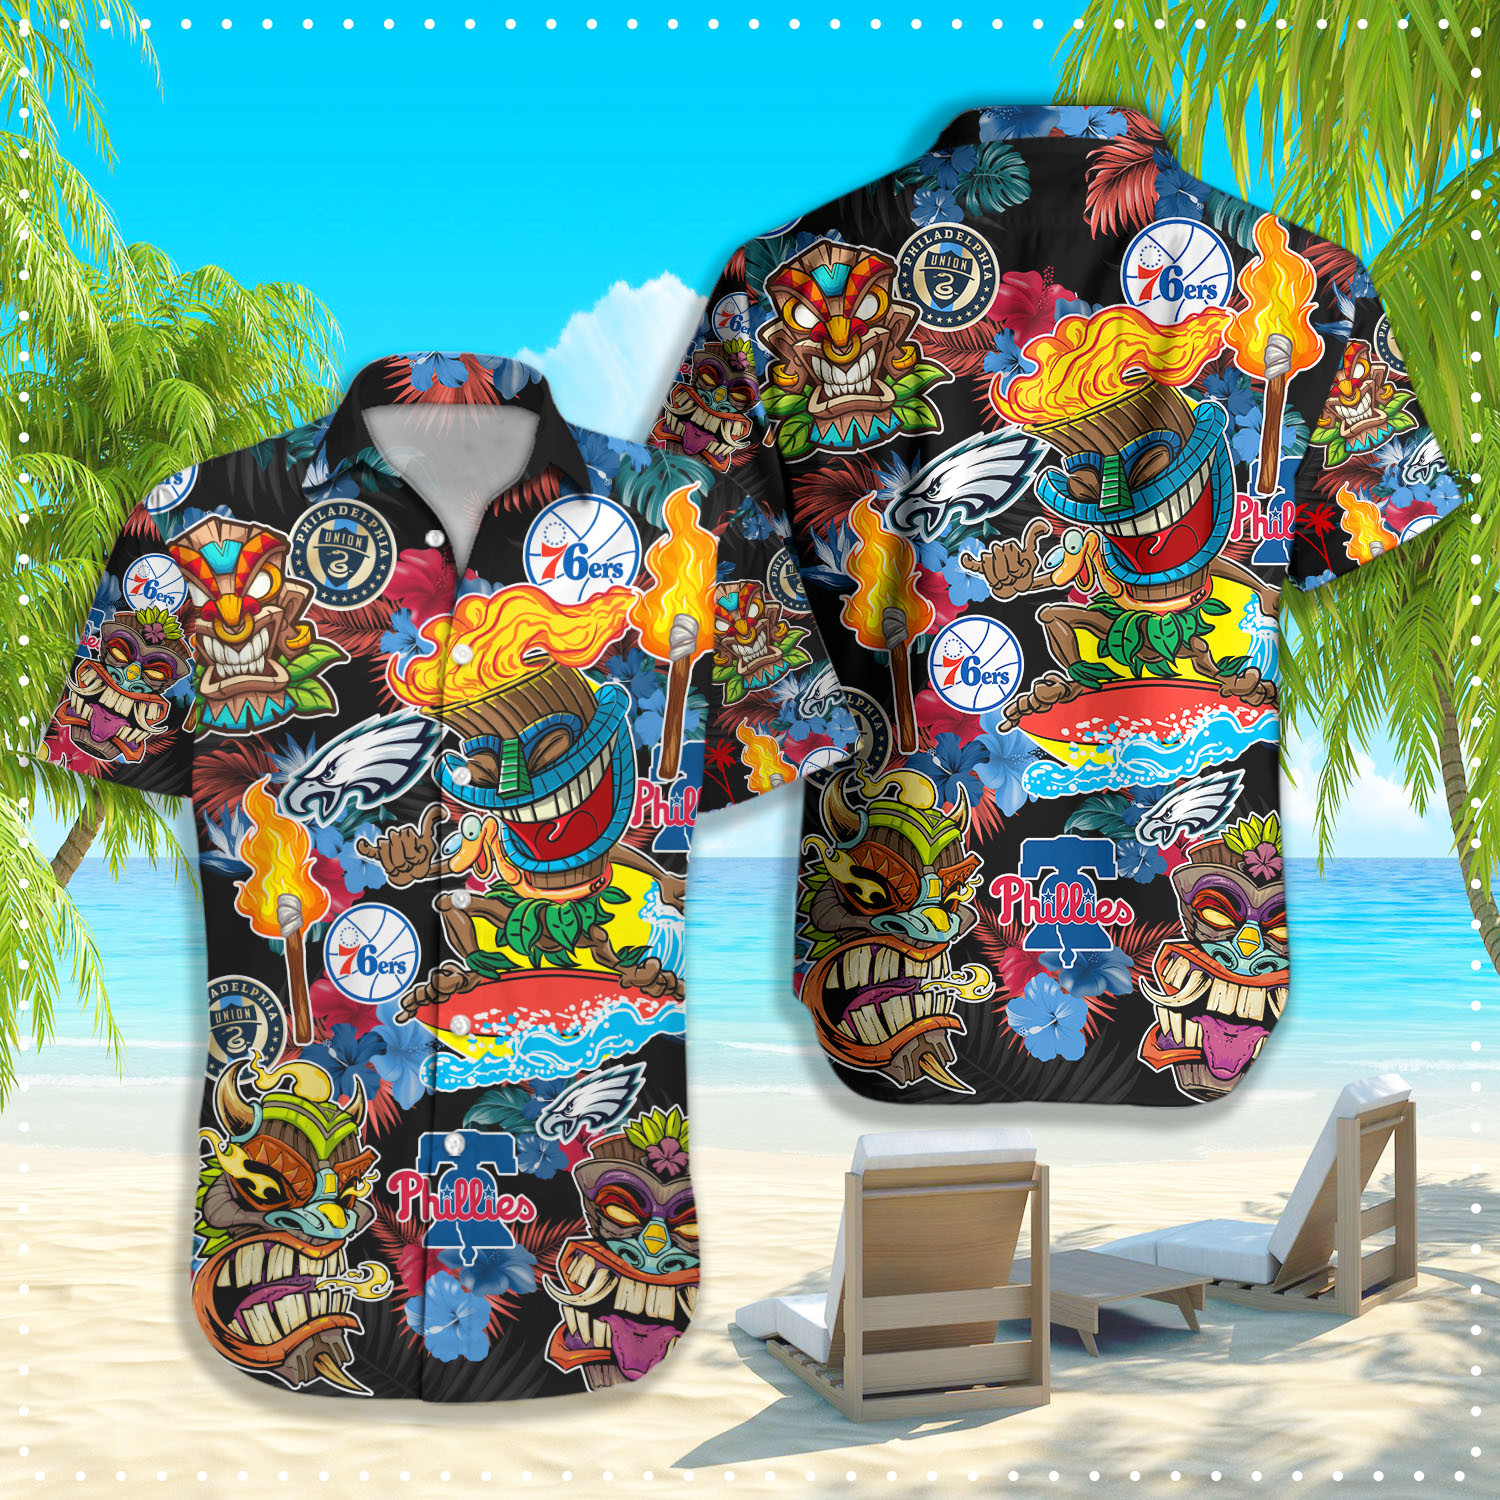 If you're looking for a NHL Hawaiian shirt to wear, don't wait until the last minute! 207